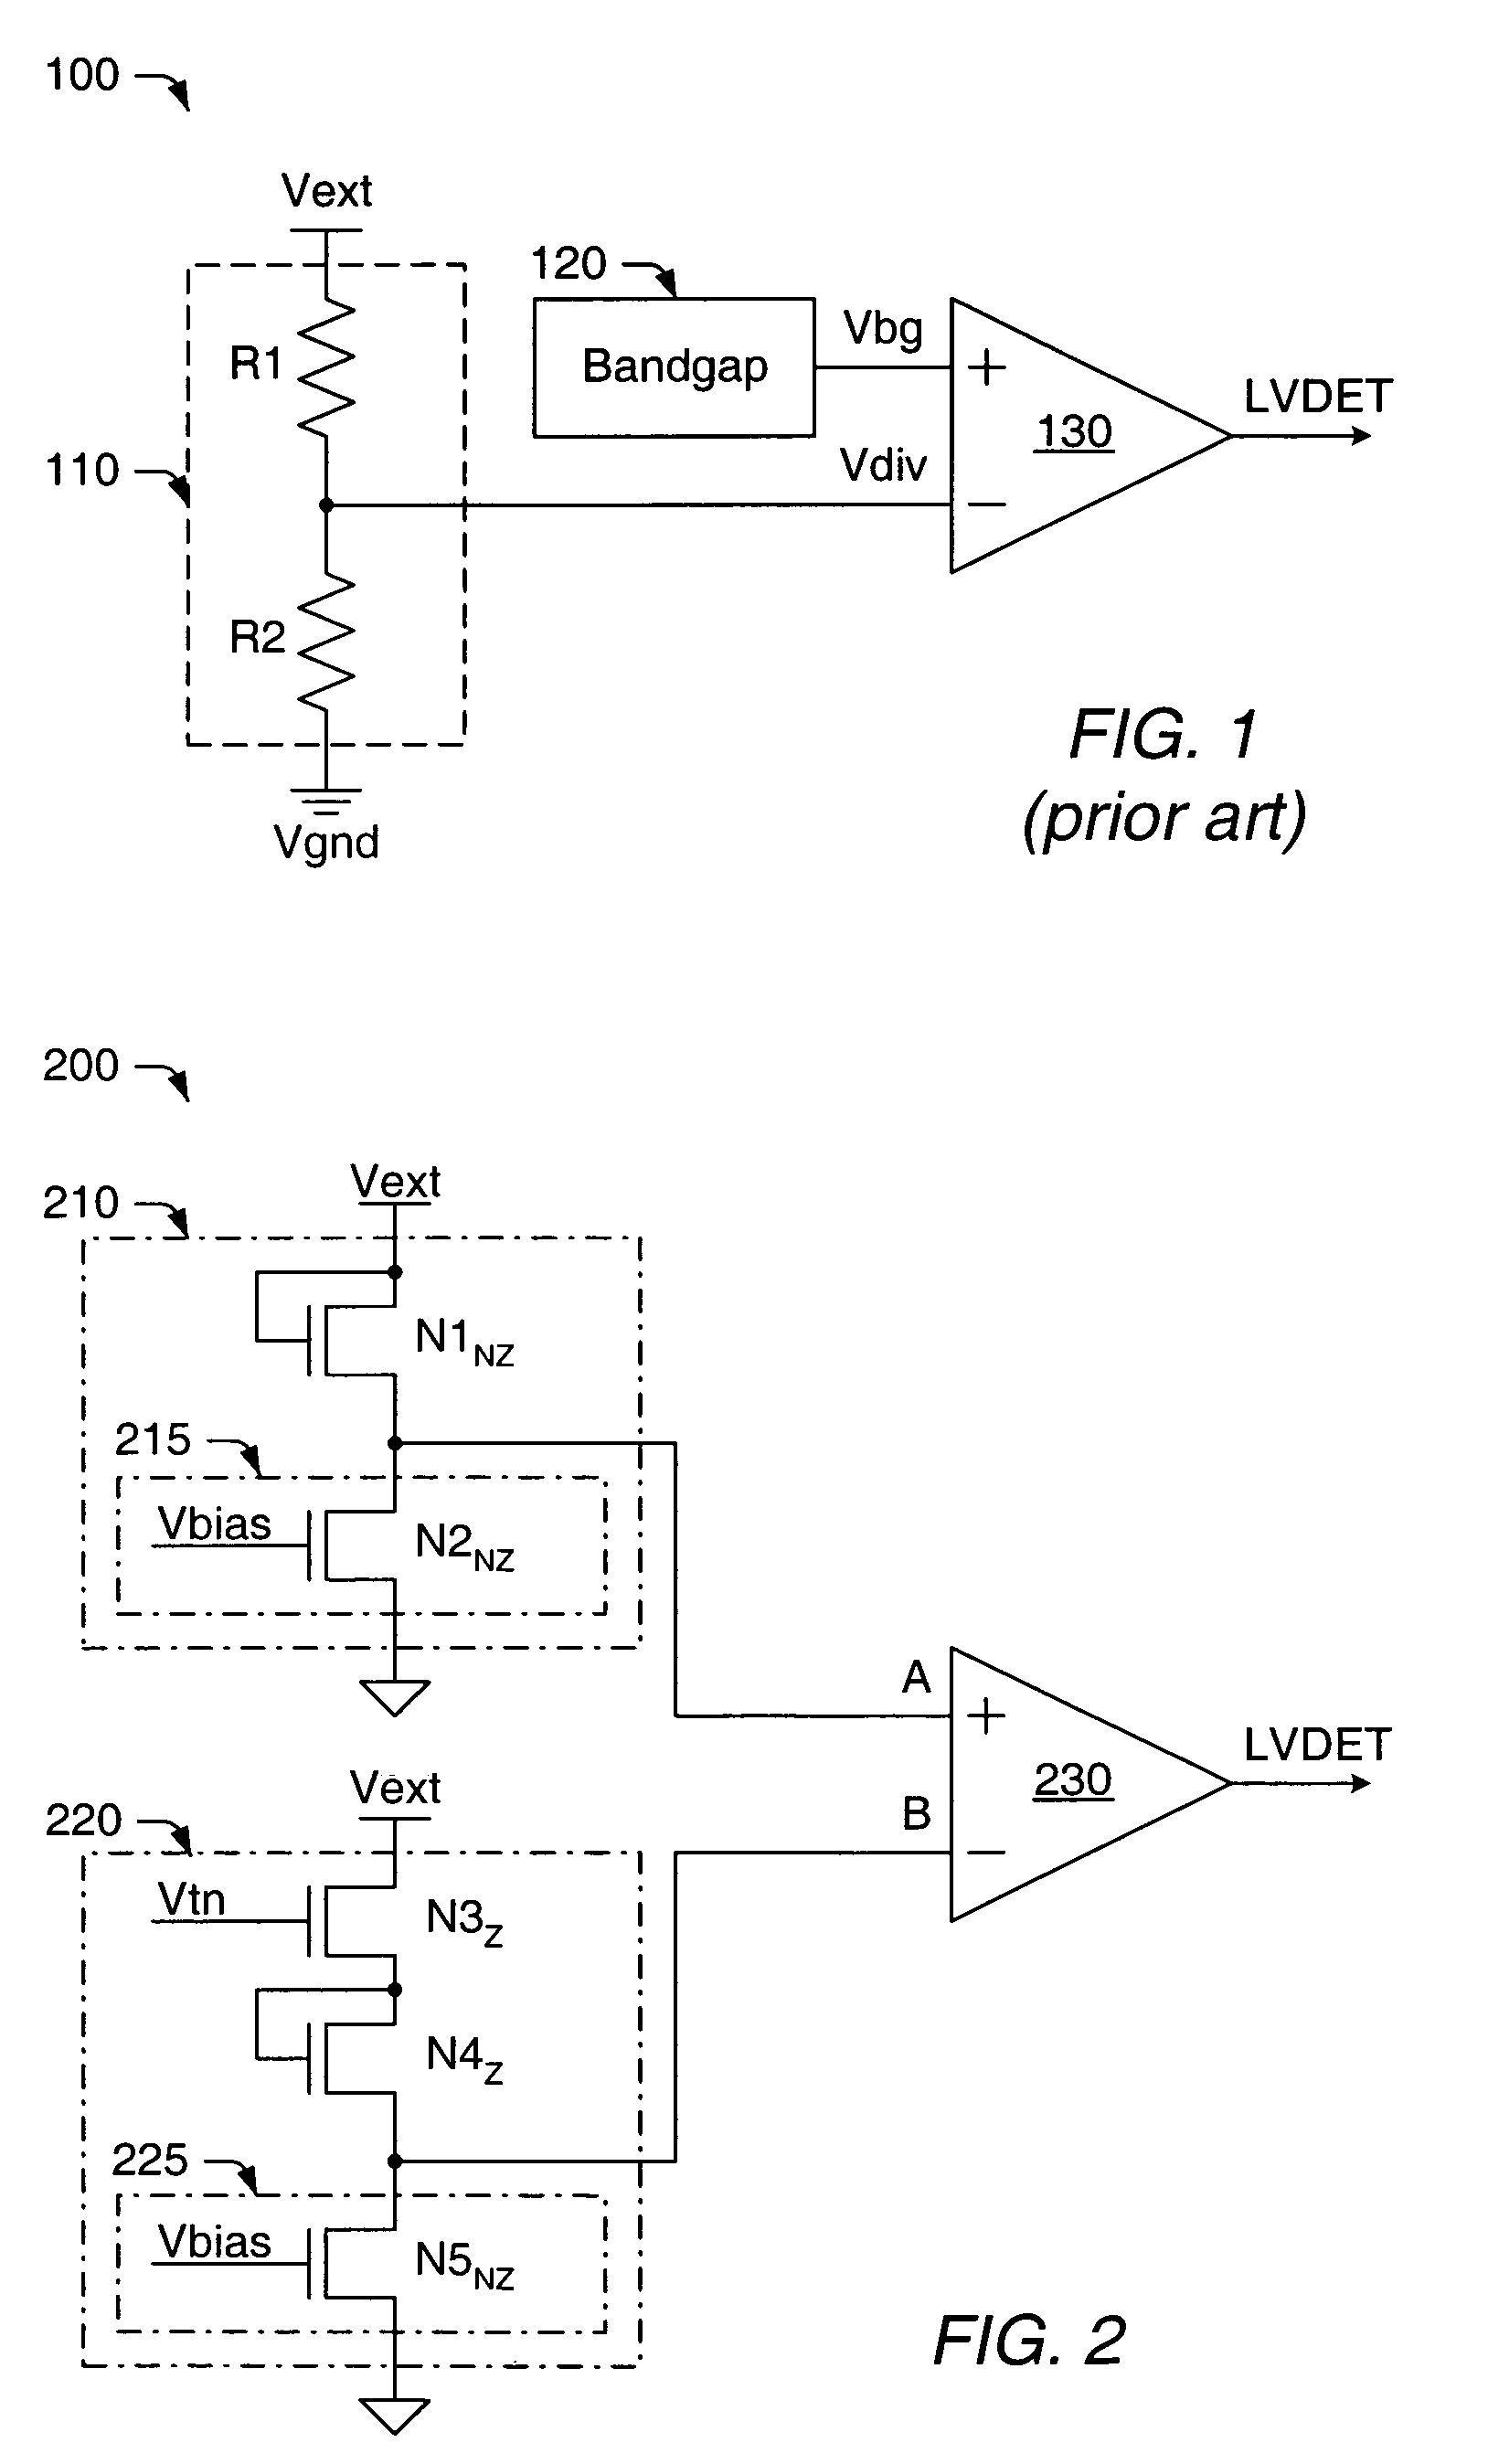 Resistor-less accurate low voltage detect circuit and method for detecting a low voltage condition